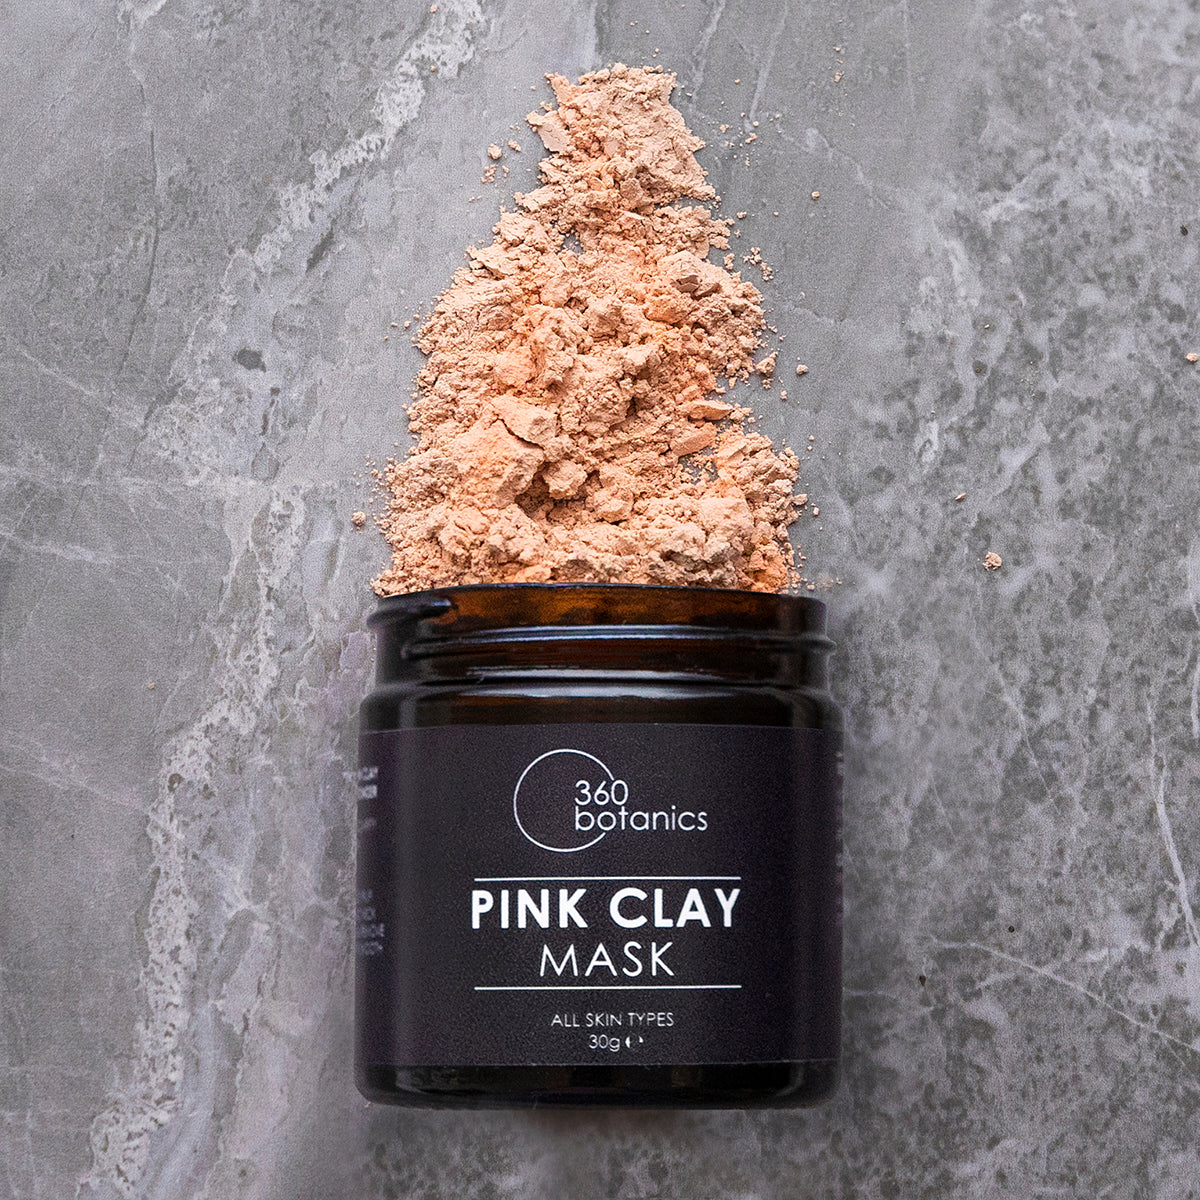  A 360 Botanics Pink Clay Mask container on a marble surface with a textured pile of pink clay powder spilling out, showcasing the natural product for all skin types.